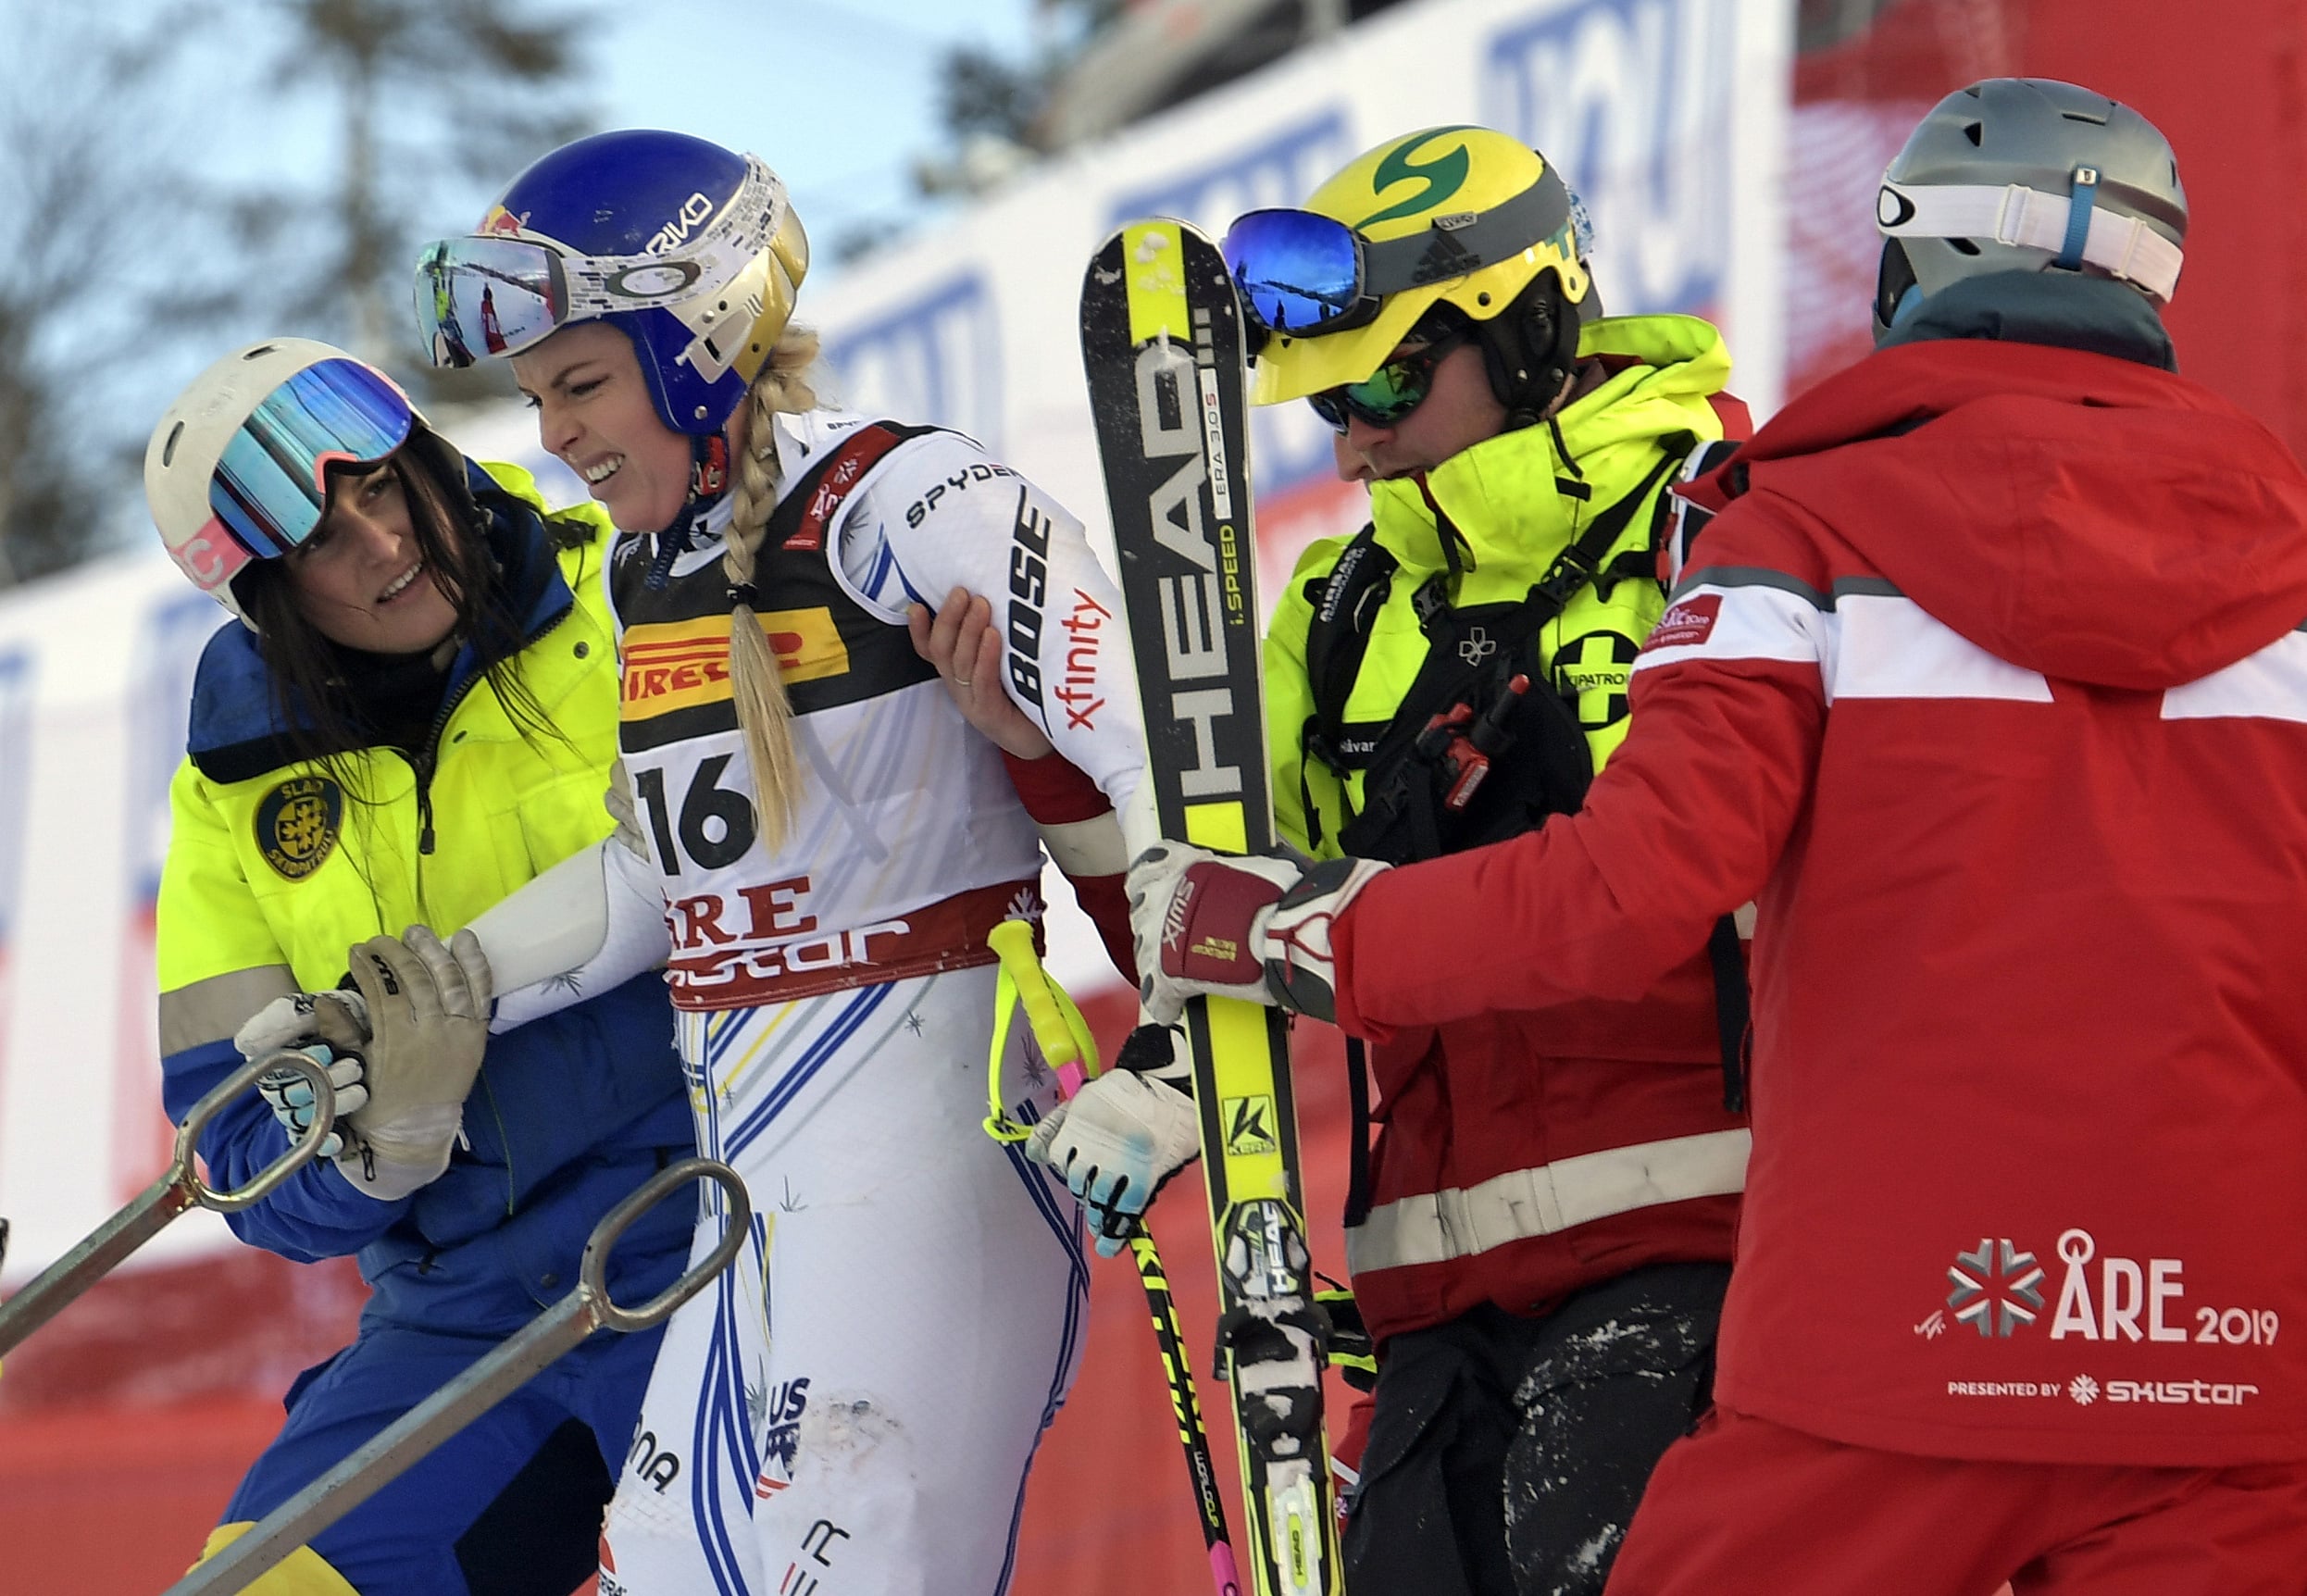 United States' Lindsey Vonn is assisted after crashing during the women's super G at the alpine ski World Championships, in Are, Sweden, Tuesday, Feb. 5, 2019.